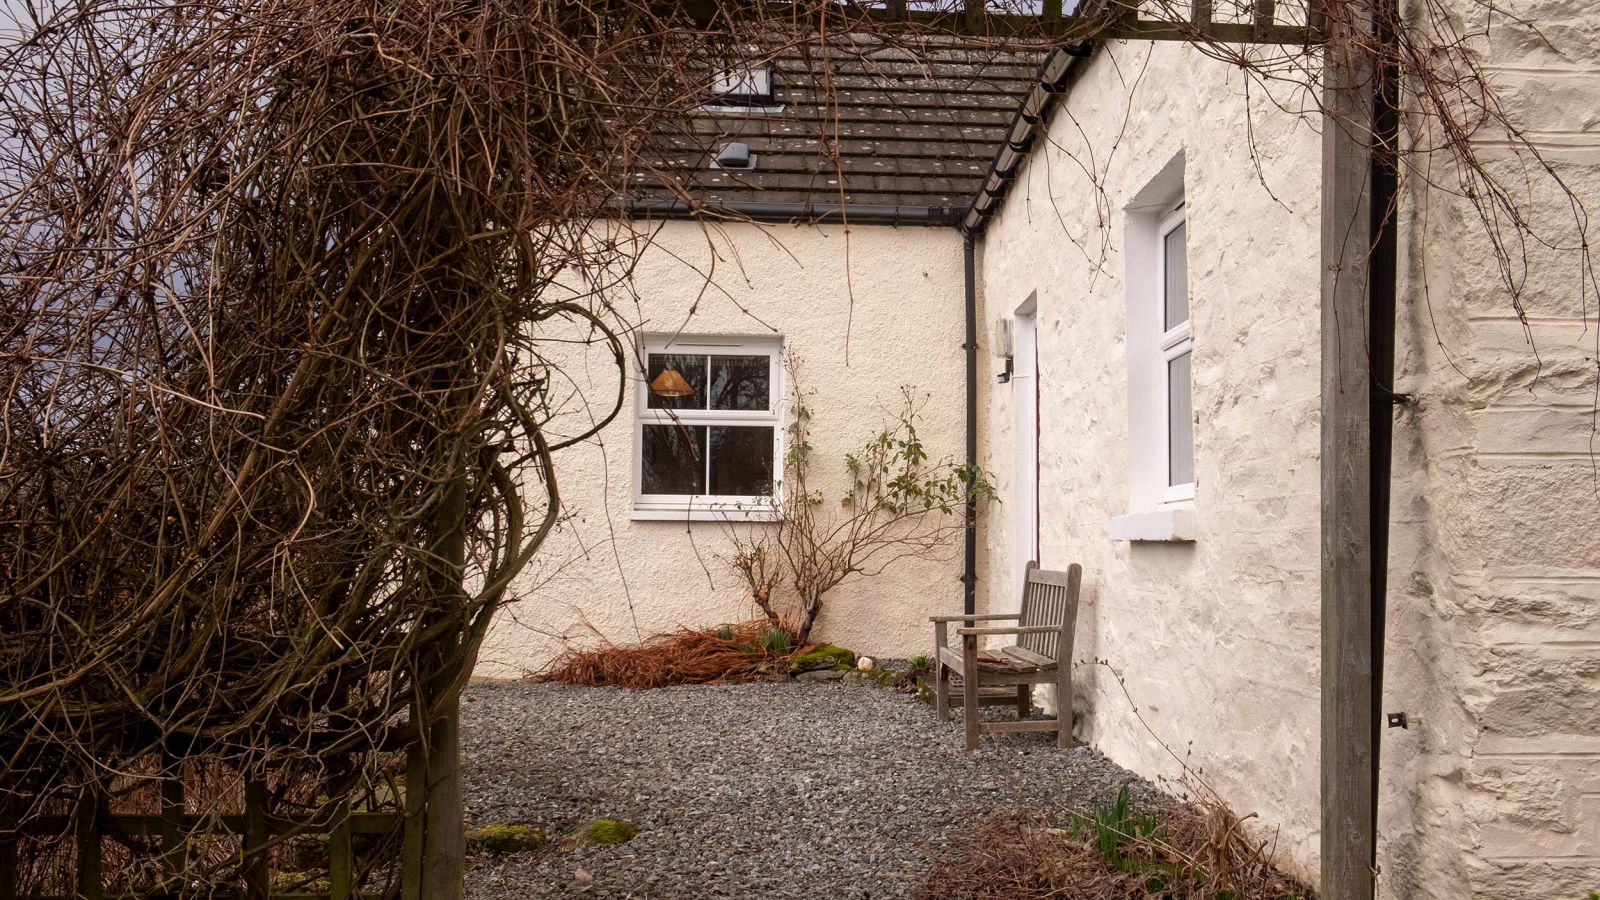 Blairchroisk Cottage in the heart of Highland Perthshire